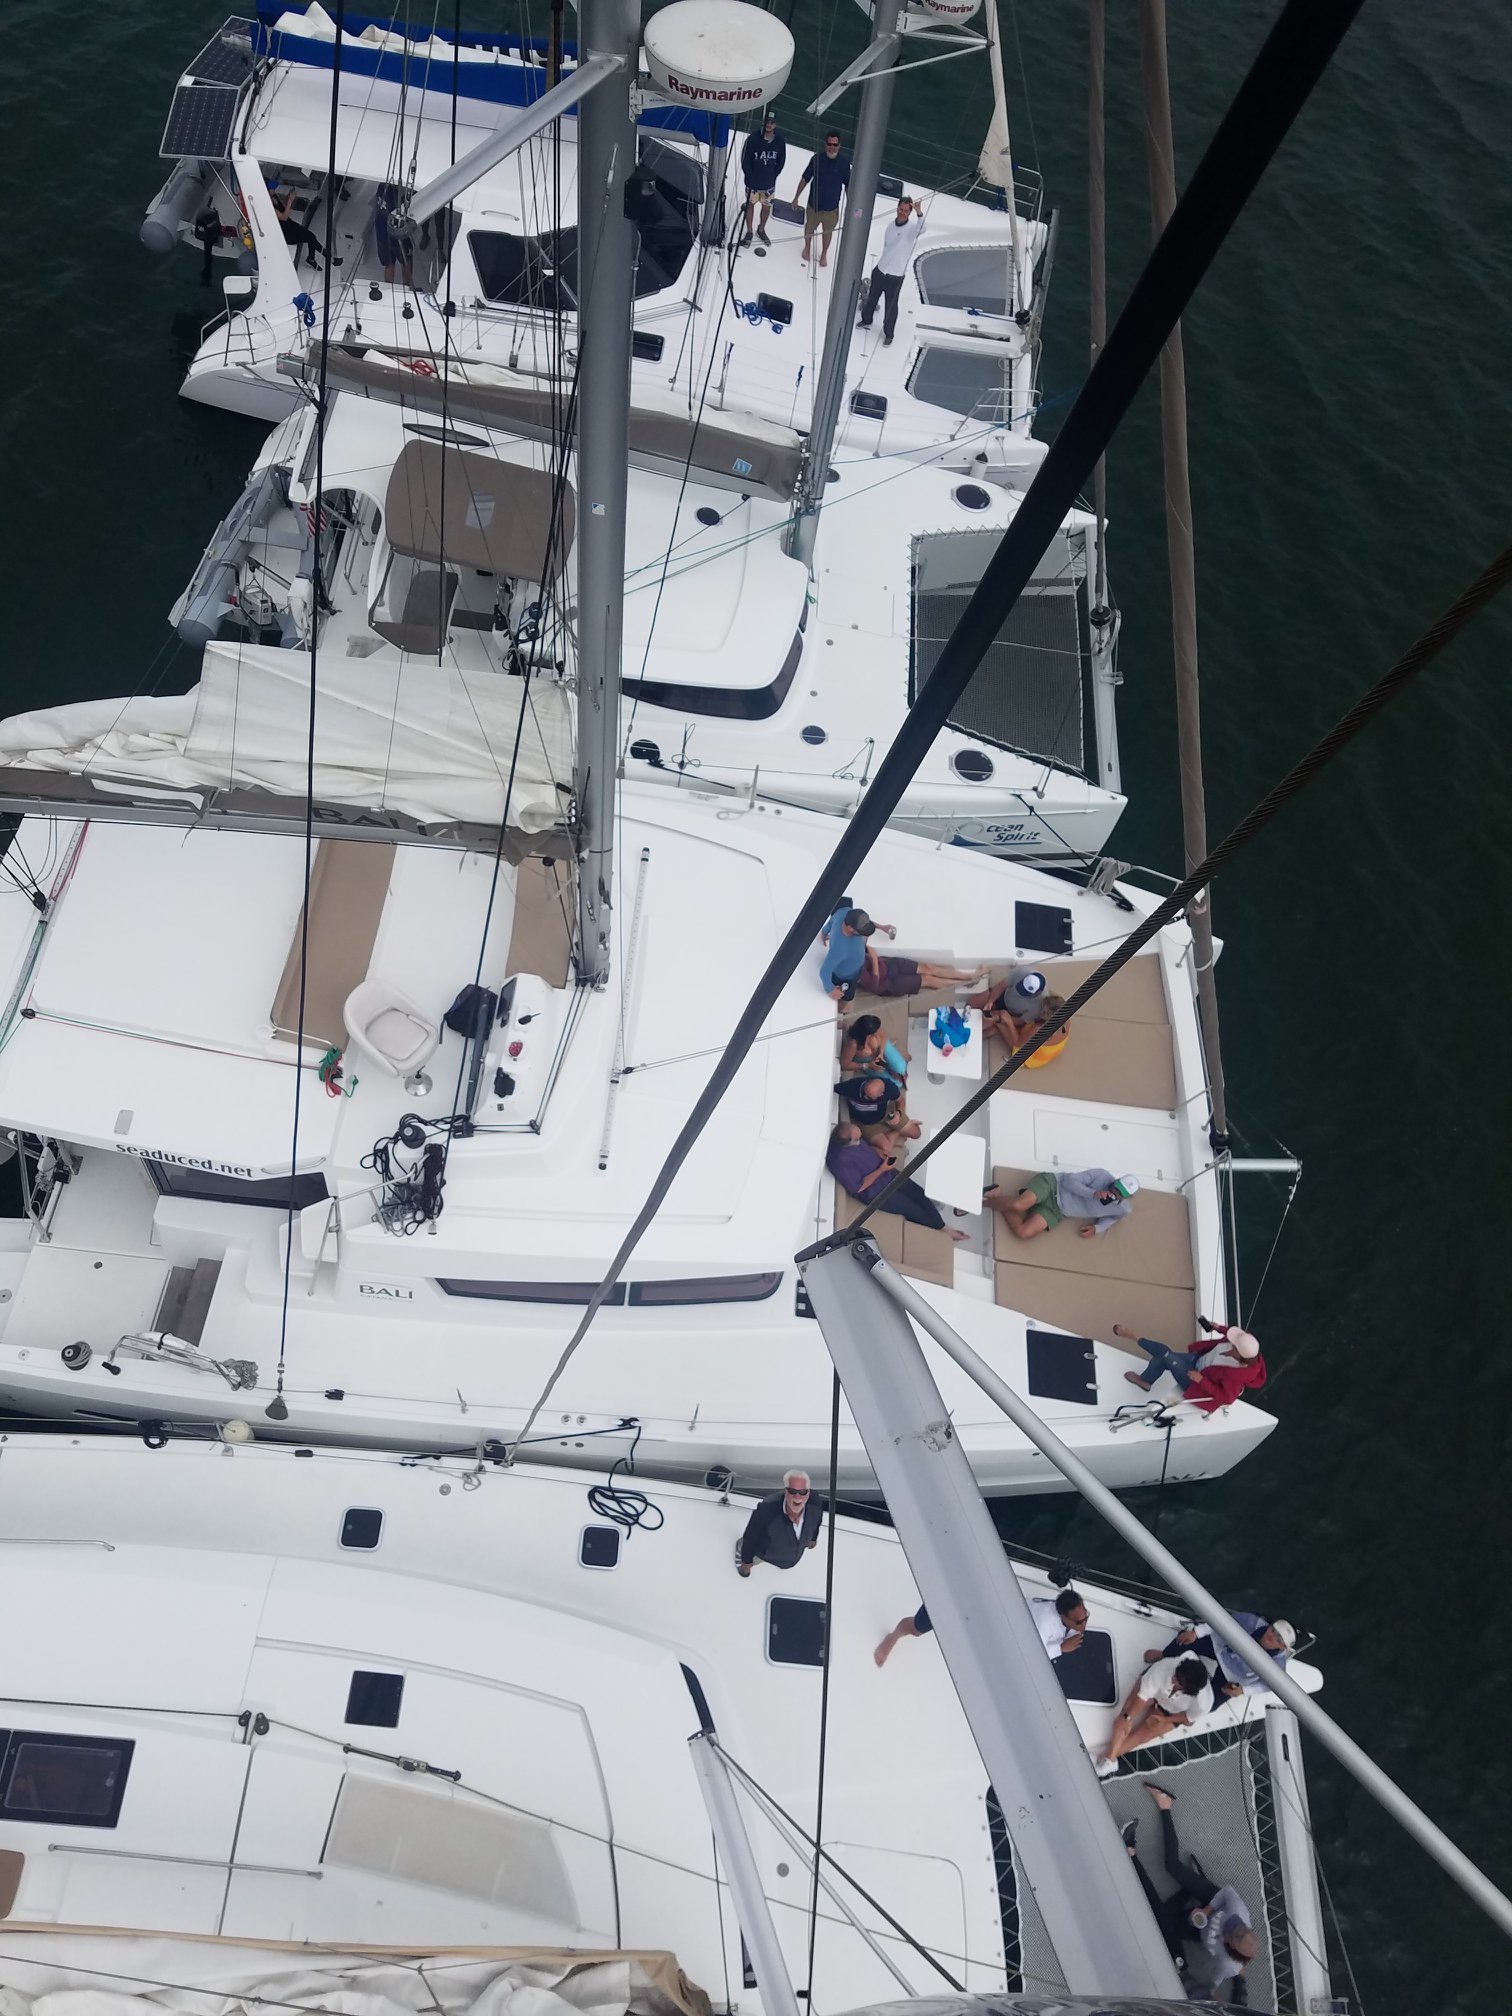 Who Won the 2018 Summer Sailstice Raft up Contest?